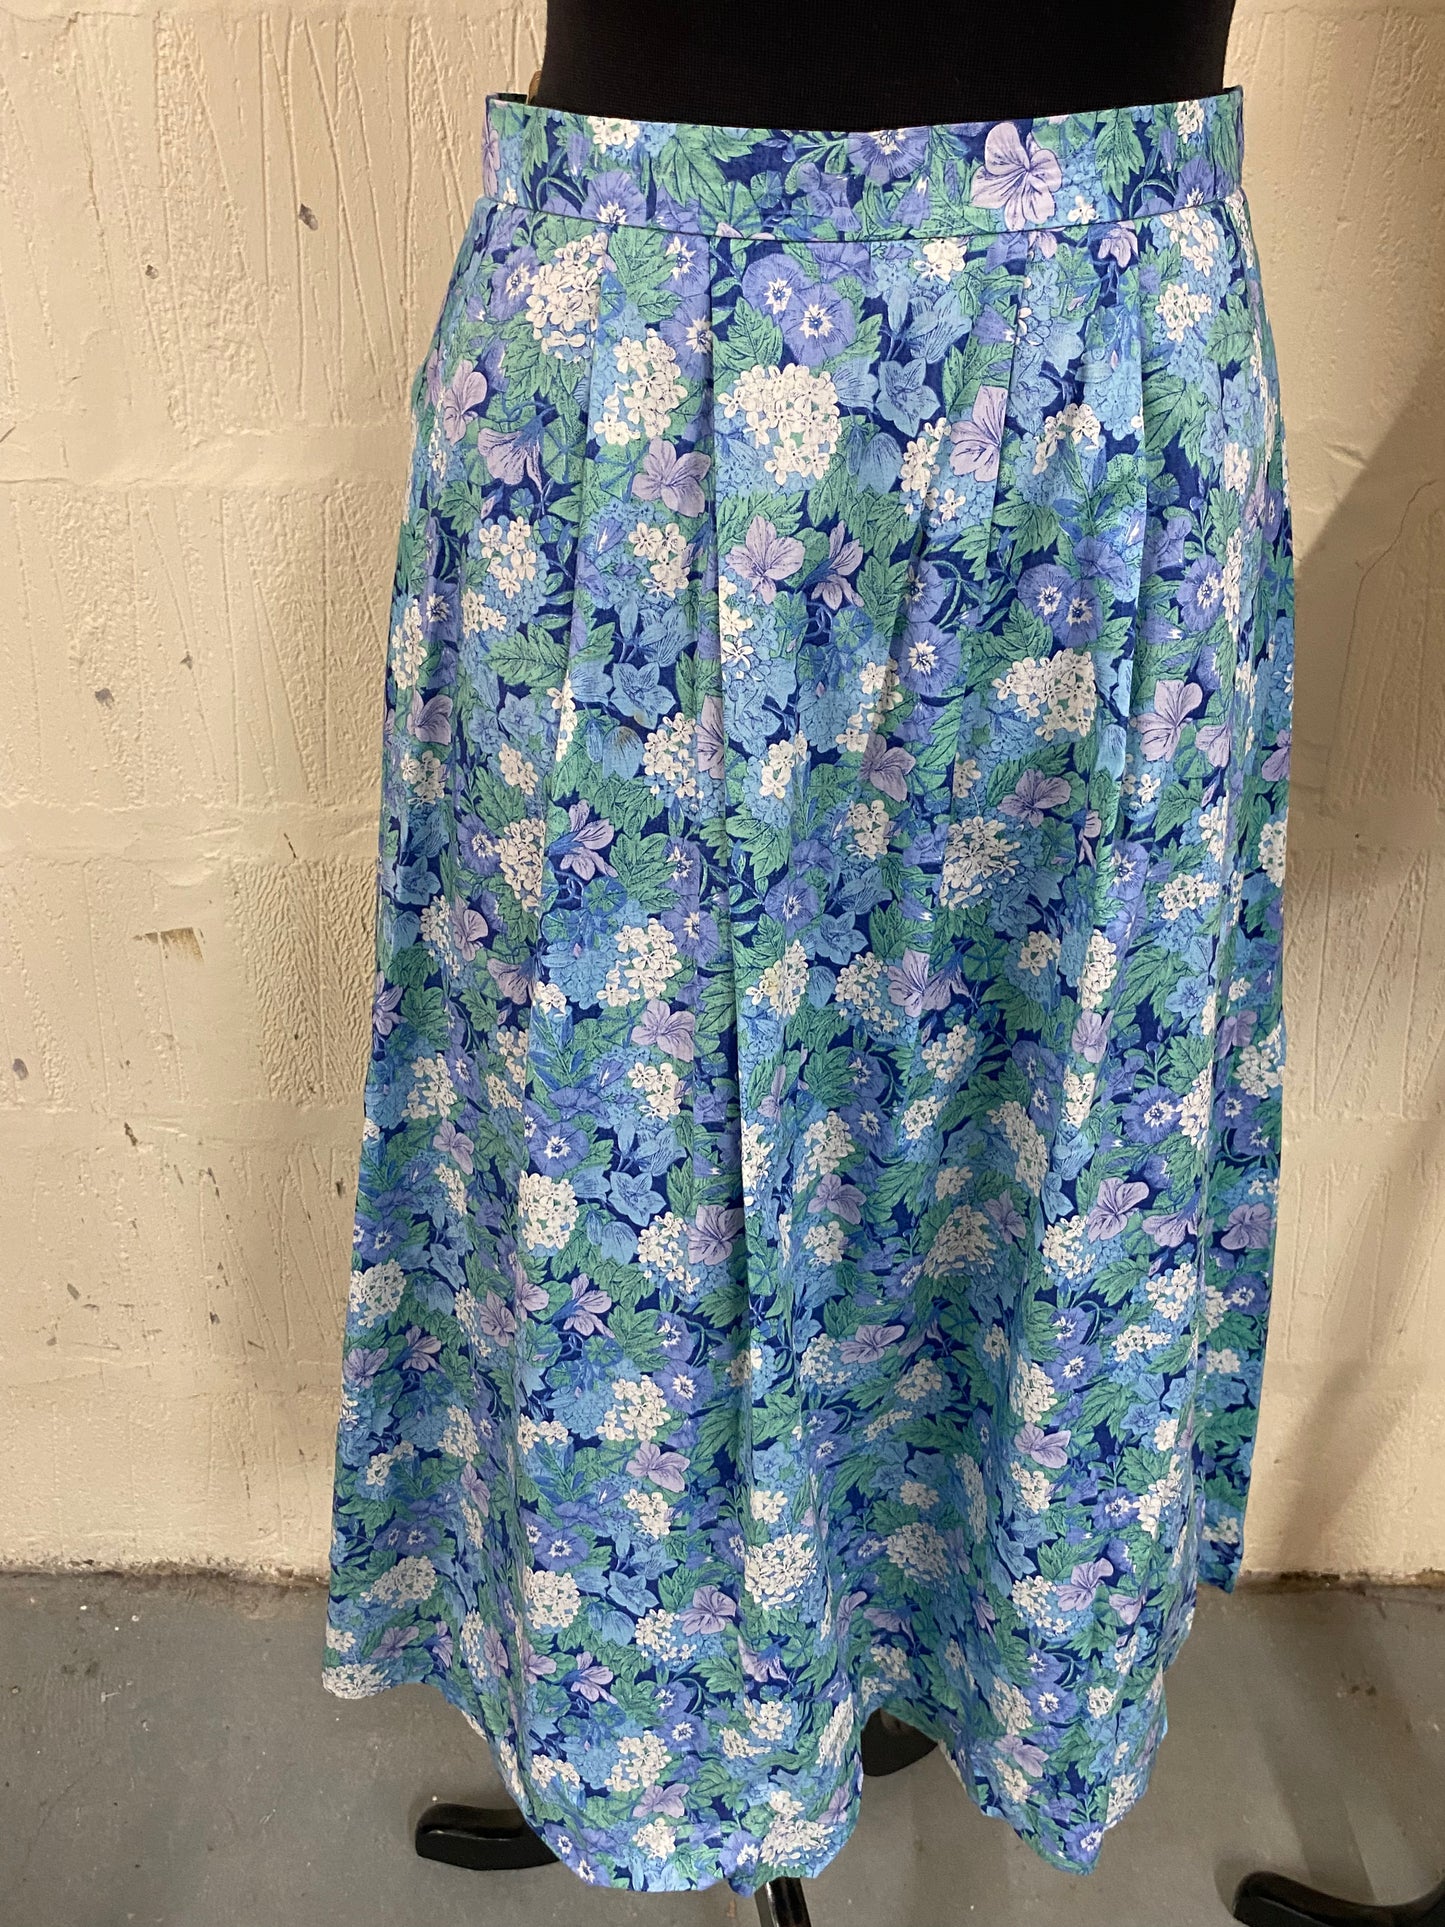 Vintage 'Liberty Style' Made In England Blue Floral Skirt Size 10